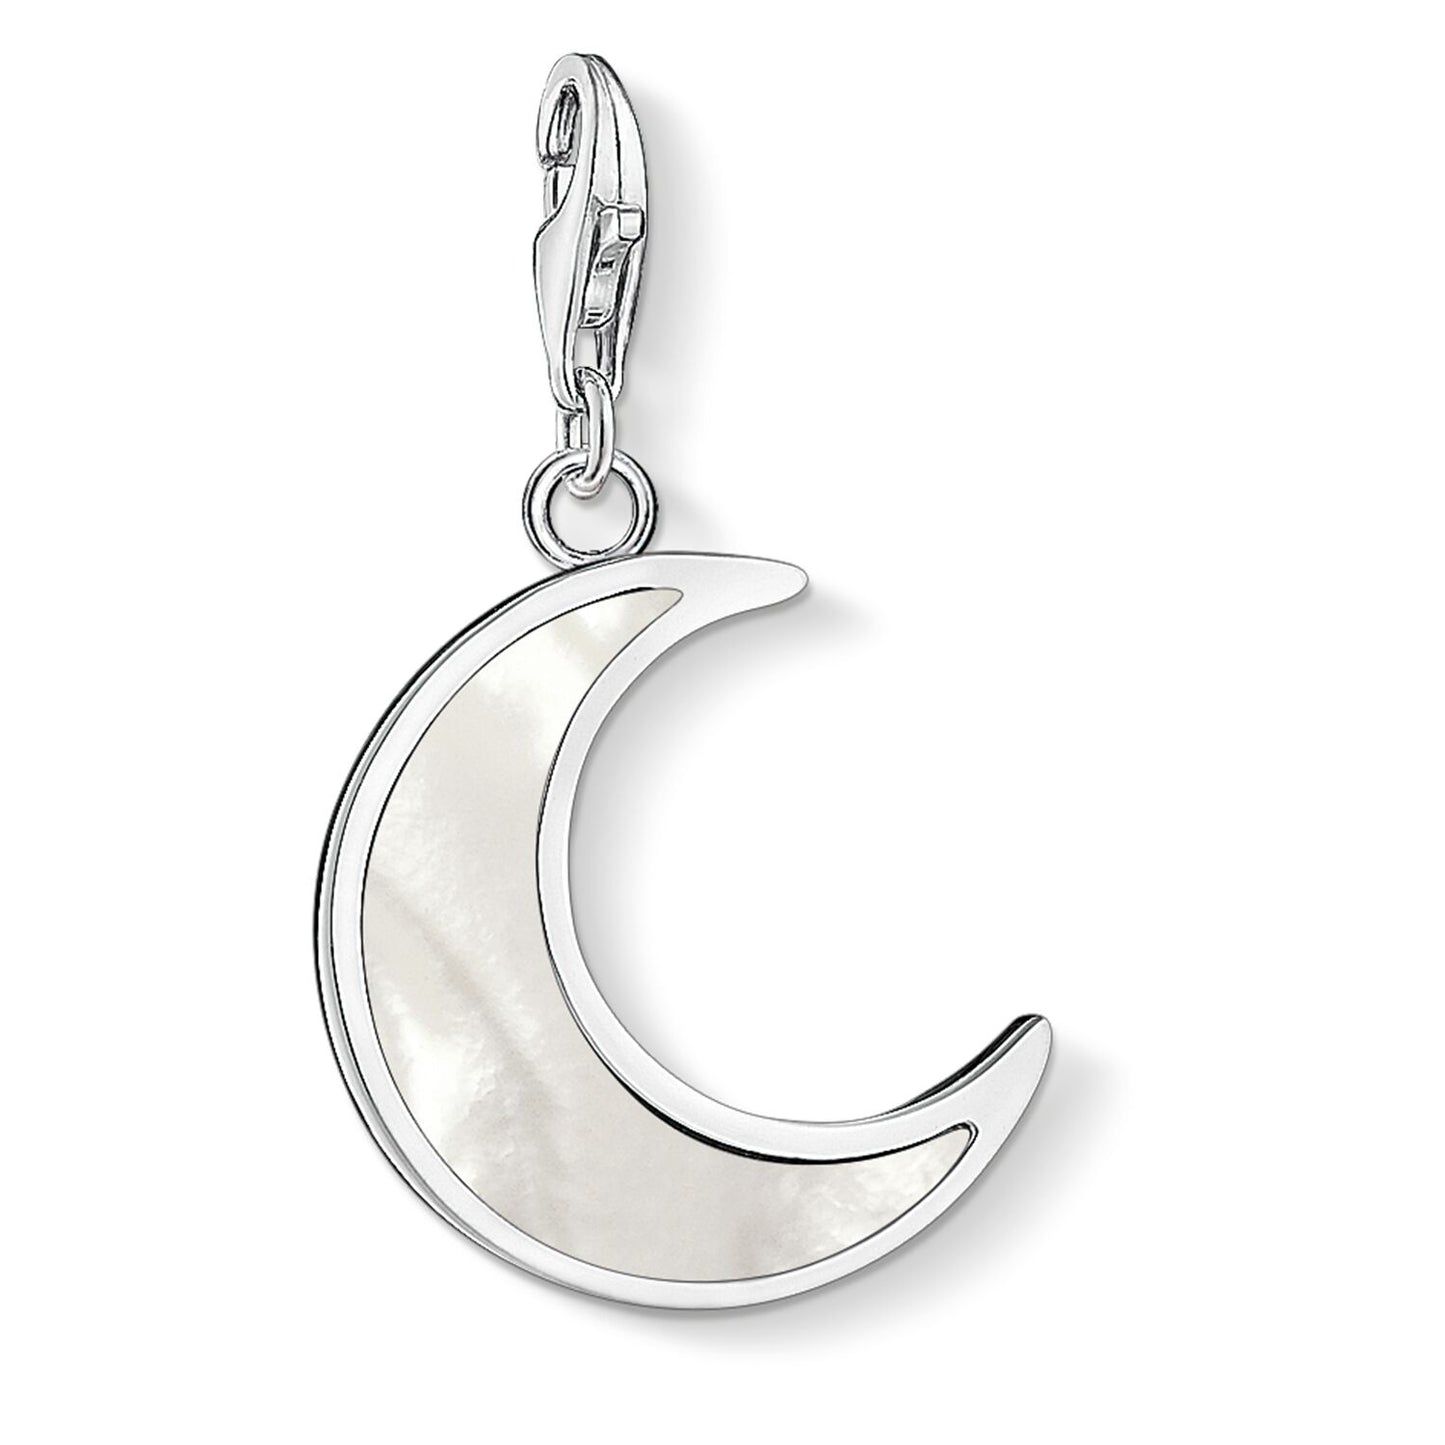 CHARM CLUB STERLING SILVER MOTHER OF PEARL MOON CHARM